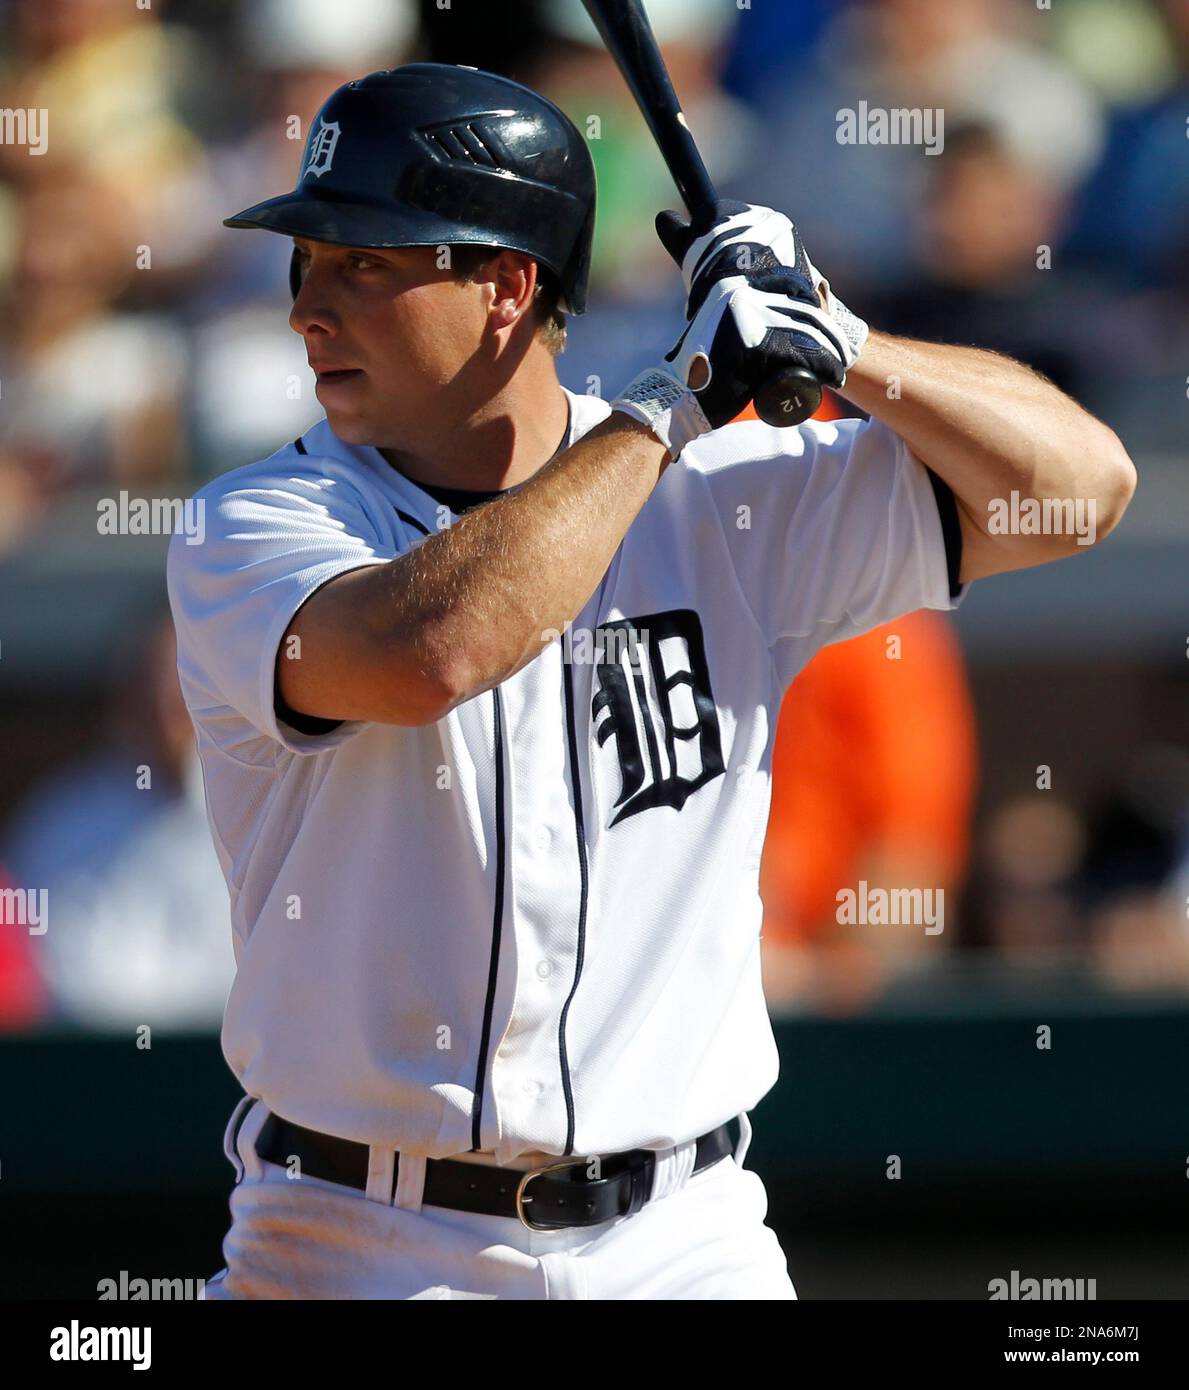 Detroit Tigers' Andy Dirks takes an at-bat during a spring